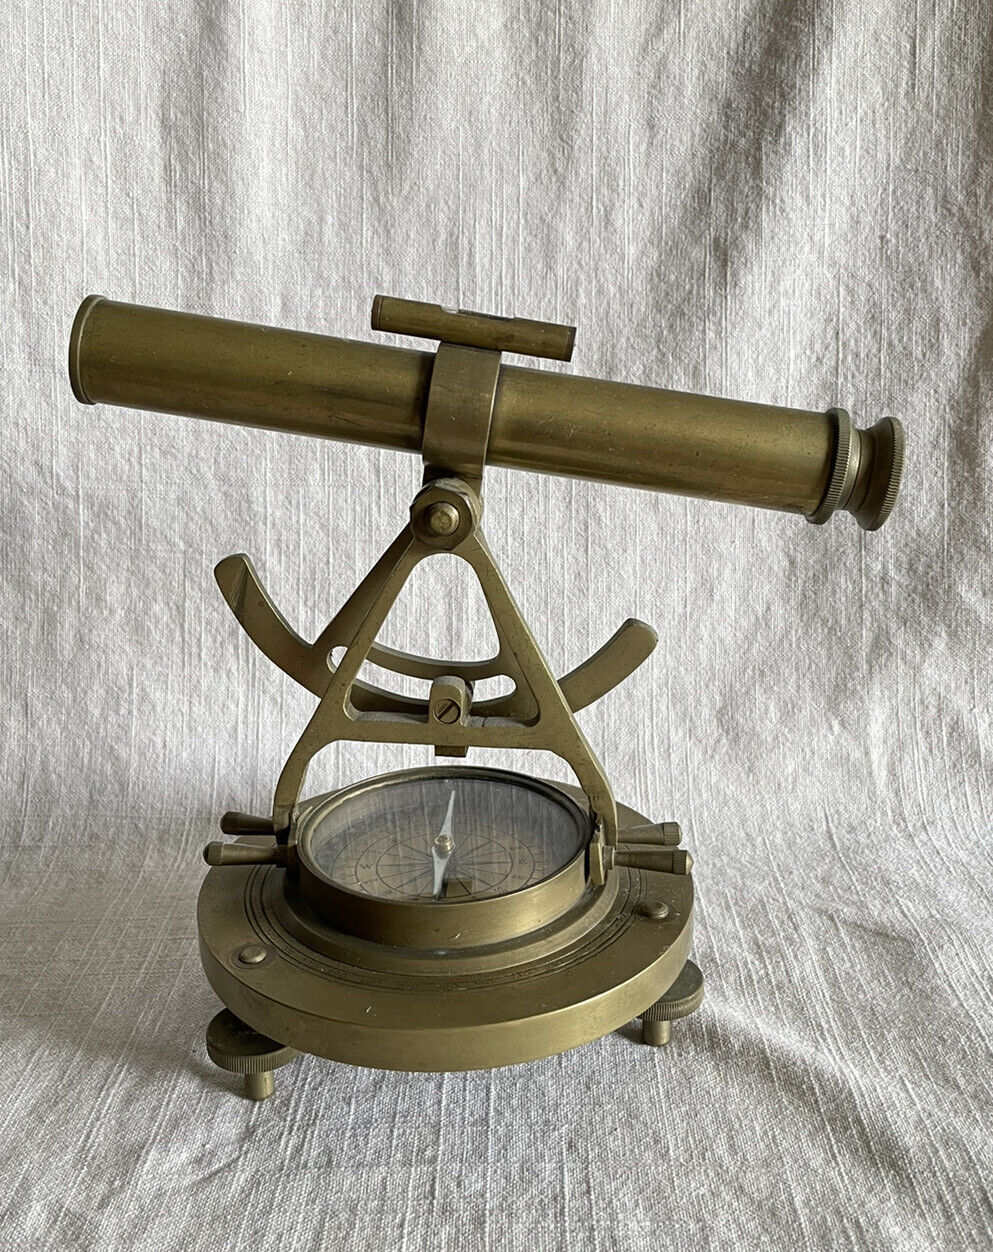 Vintage Brass Theodolite Alidade Telescope Compass - 12 Inches Long (extended)